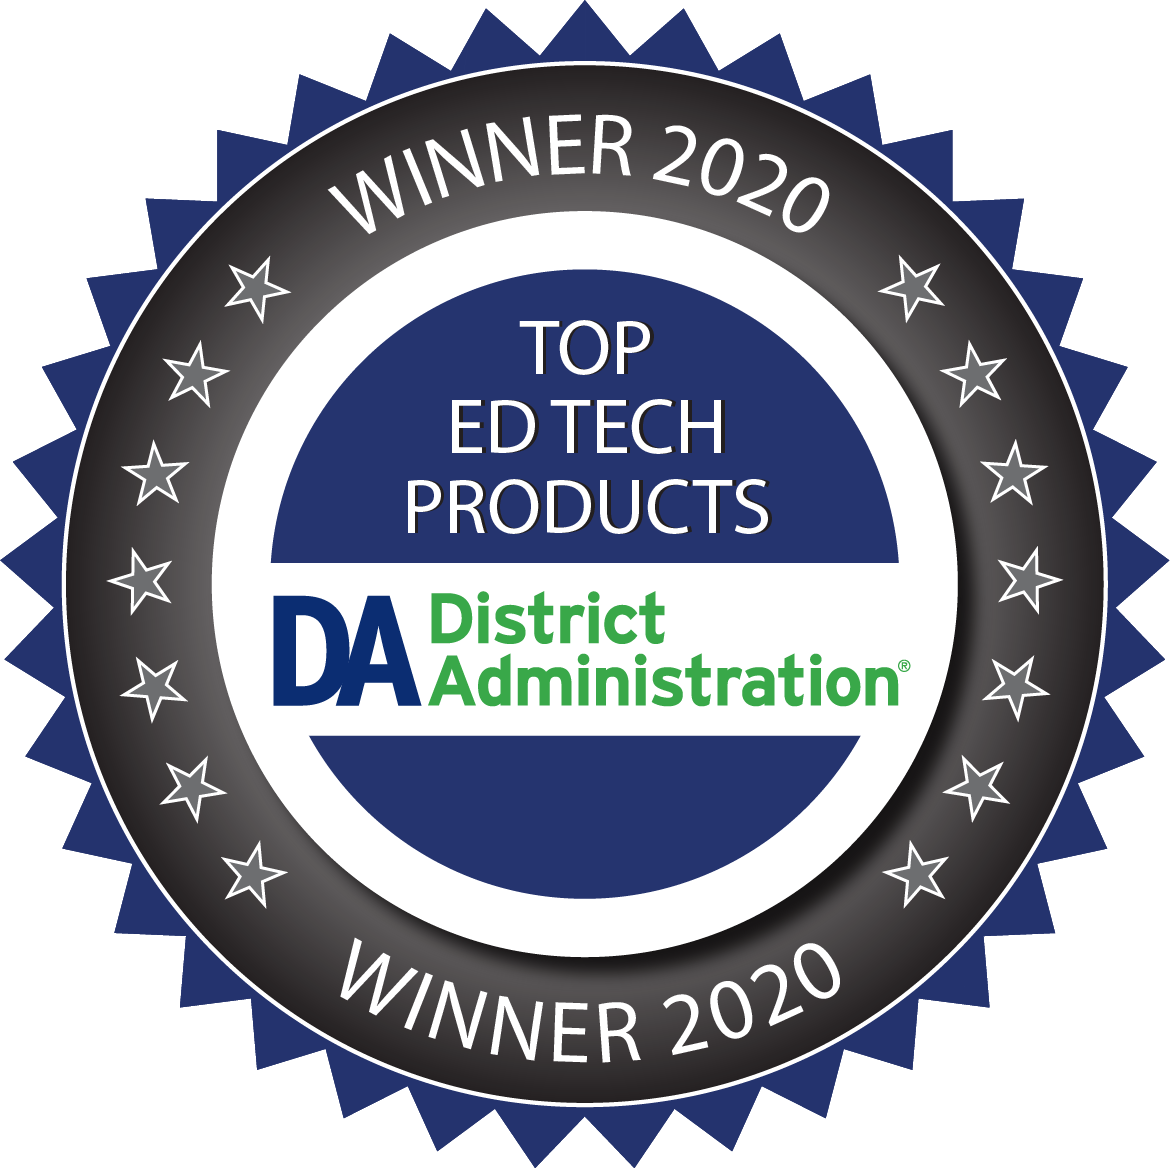 District Administration - Top EdTech product